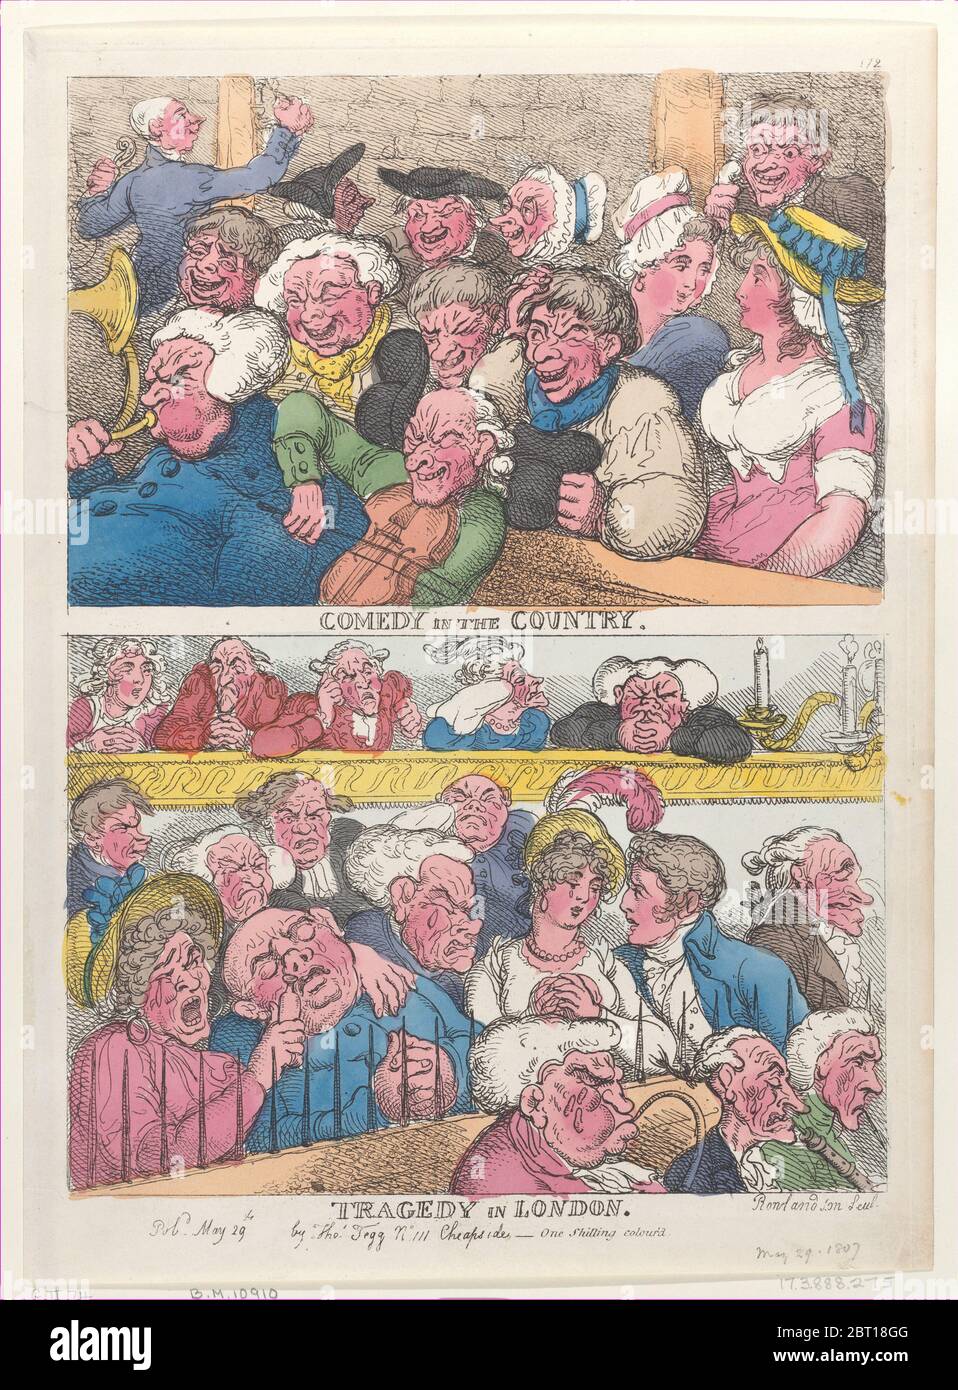 Comedy in the Country, Tragedy in London, May 29, 1807. Stock Photo